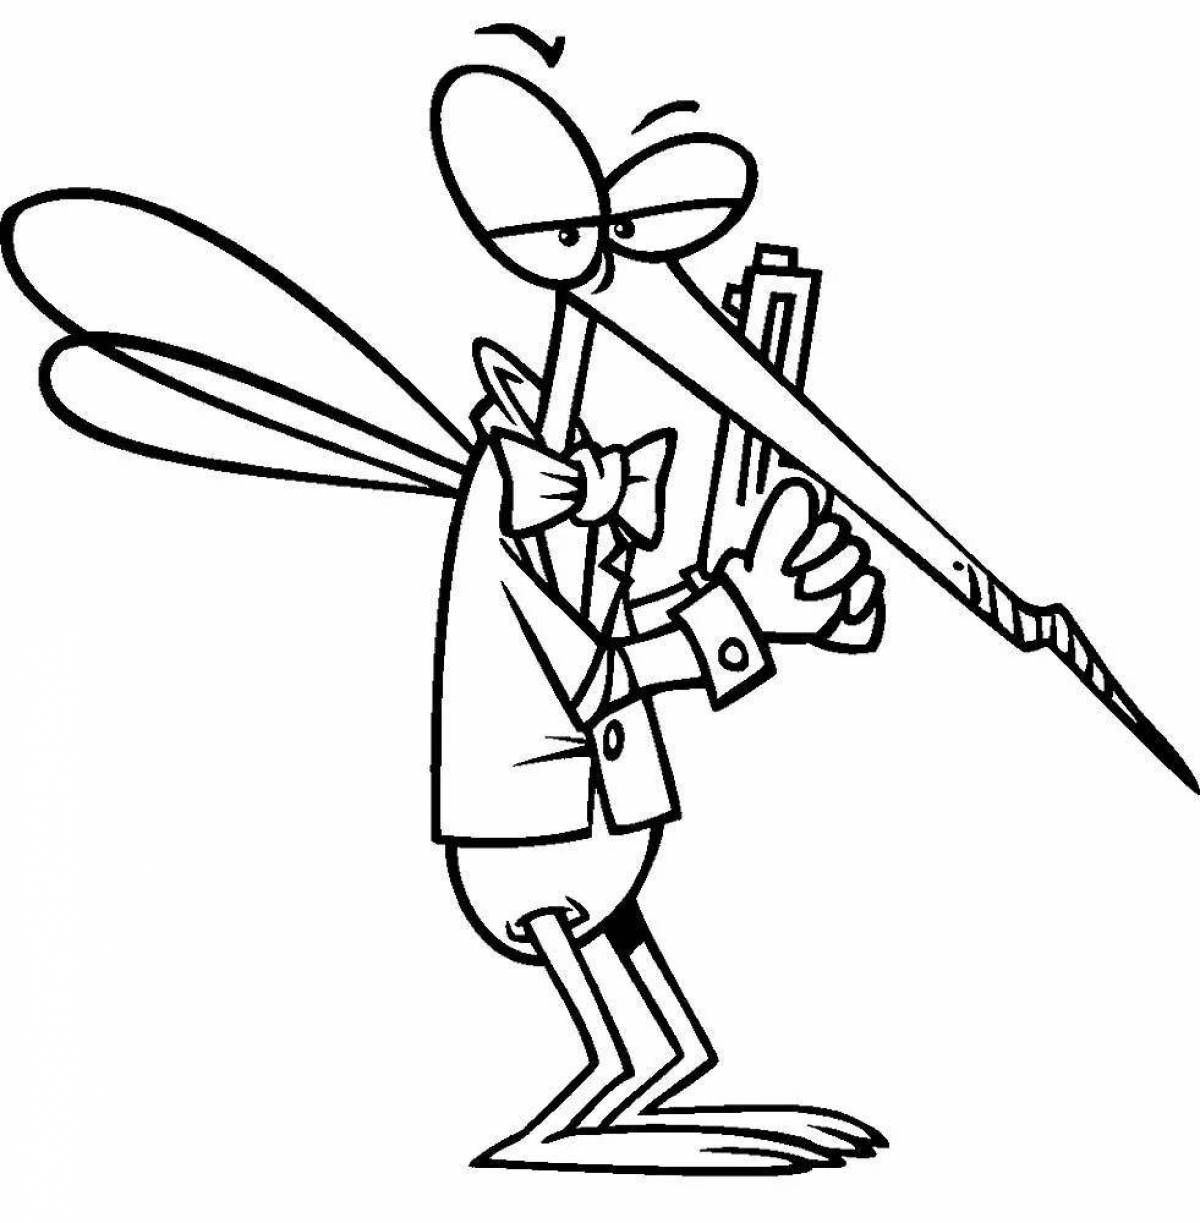 Mosquito humorous coloring book